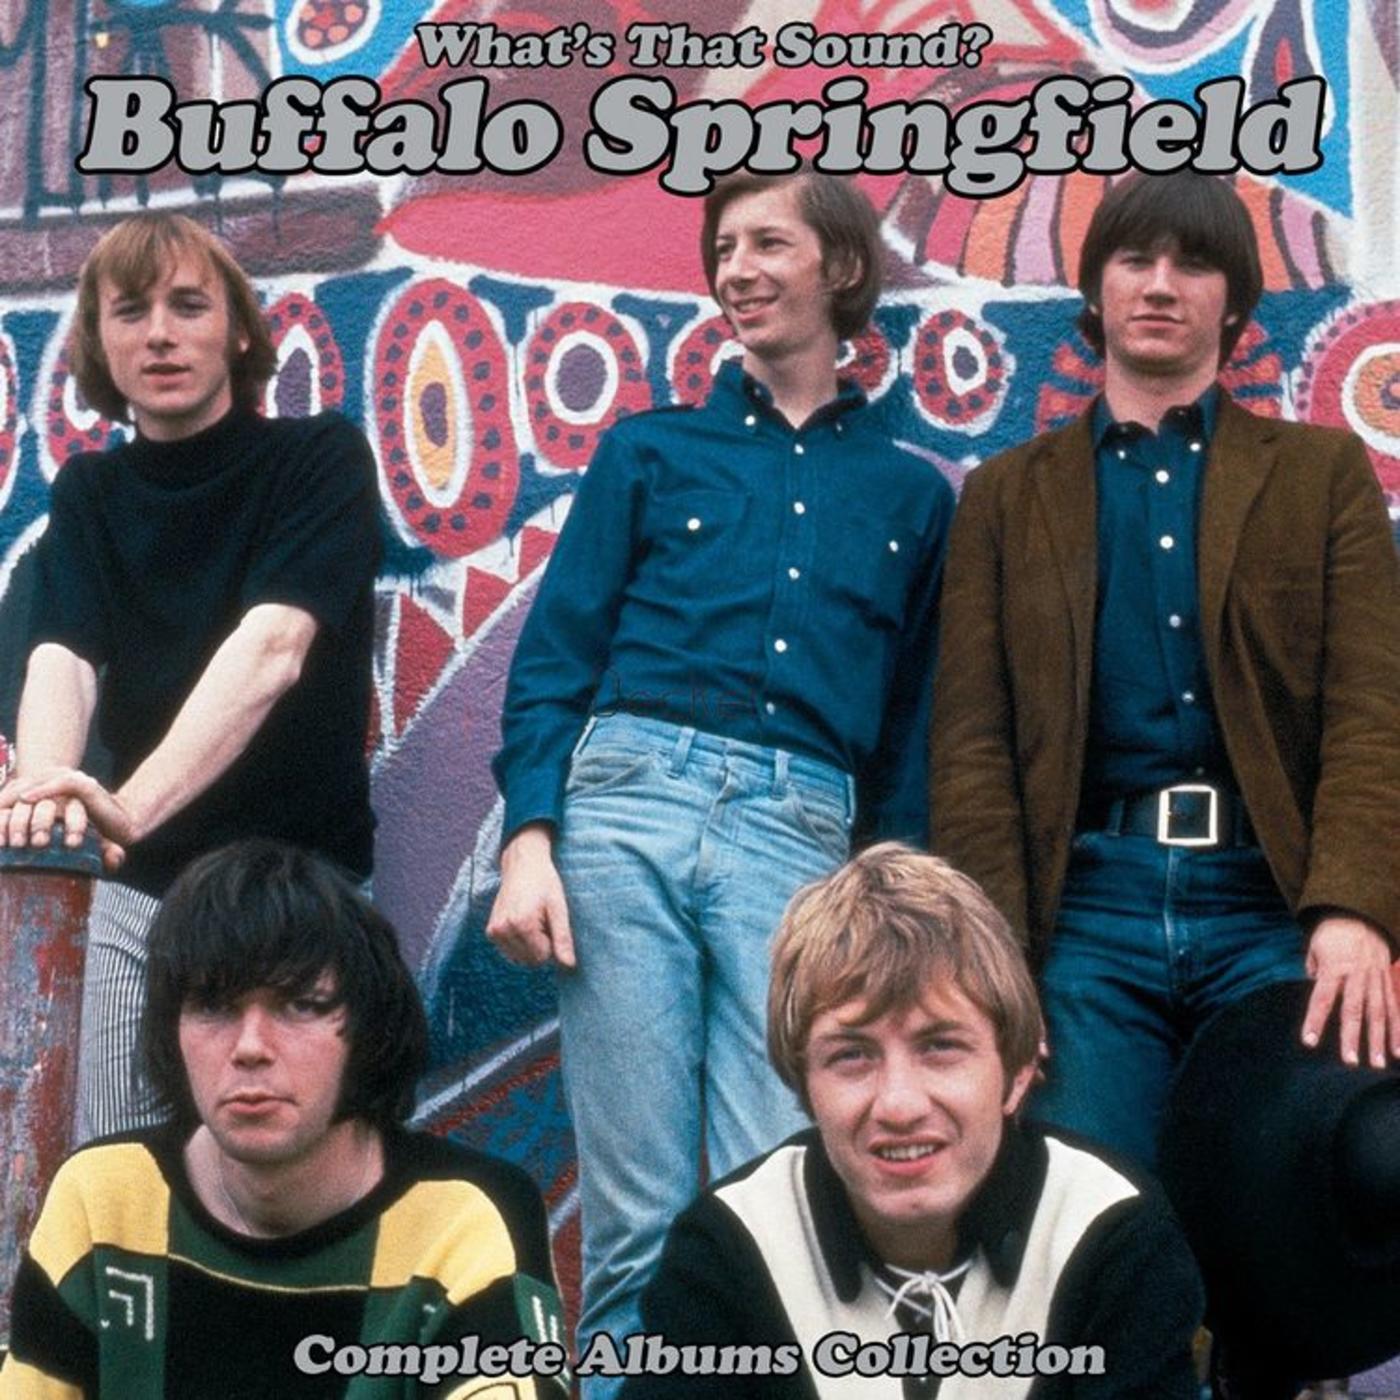 Buffalo Springfield: What’s That Sound? — Complete Album Collection